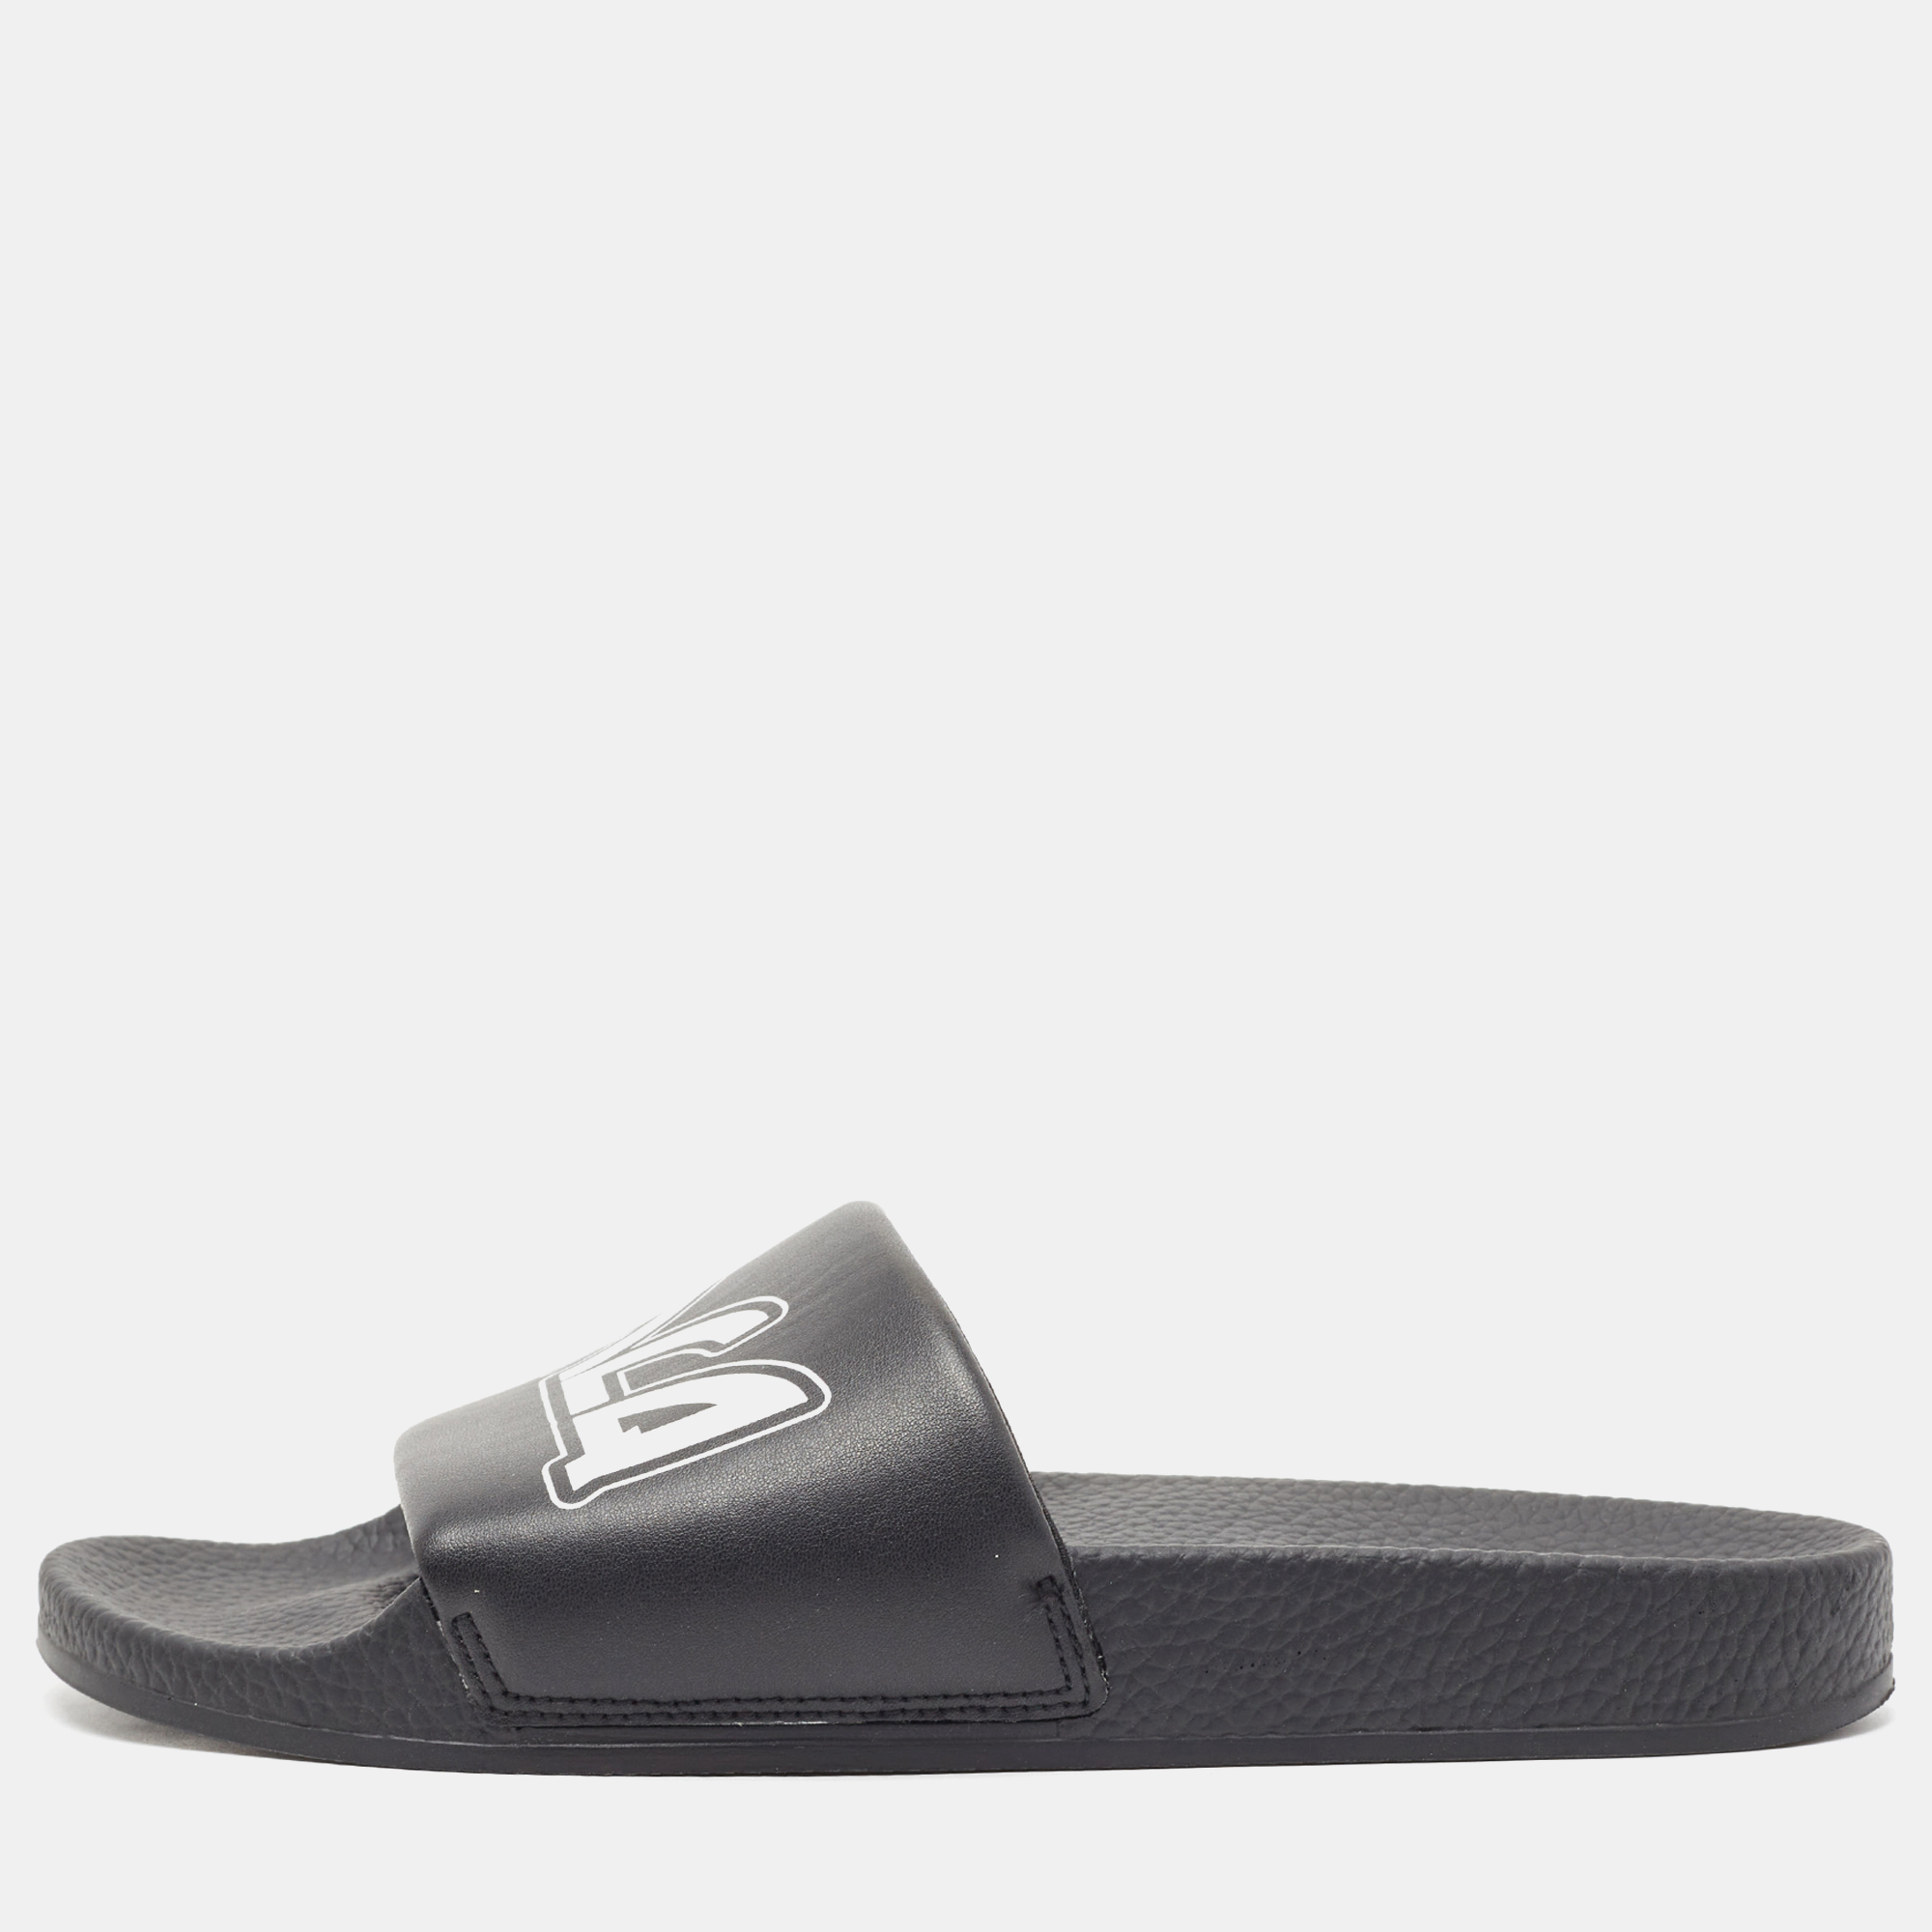 Pre-owned Mcq By Alexander Mcqueen Black Leather And Rubber Logo Pool Slides Size 40